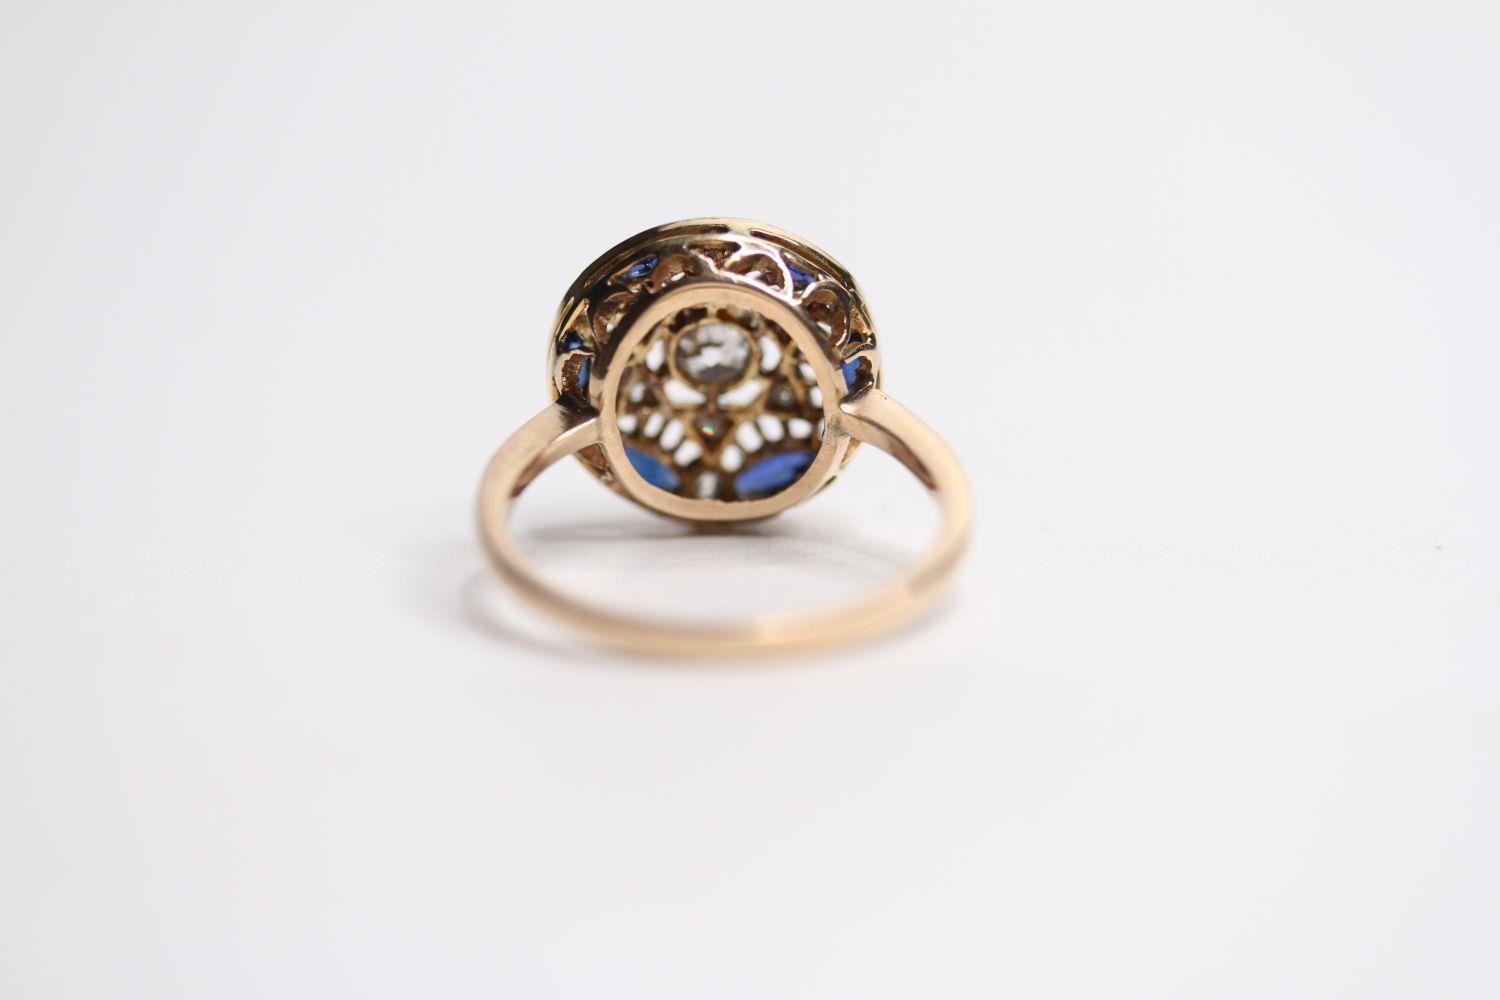 Deco Sapphire & Diamond Ring, centre shaped as a star, yellow gold, size N. - Image 3 of 3